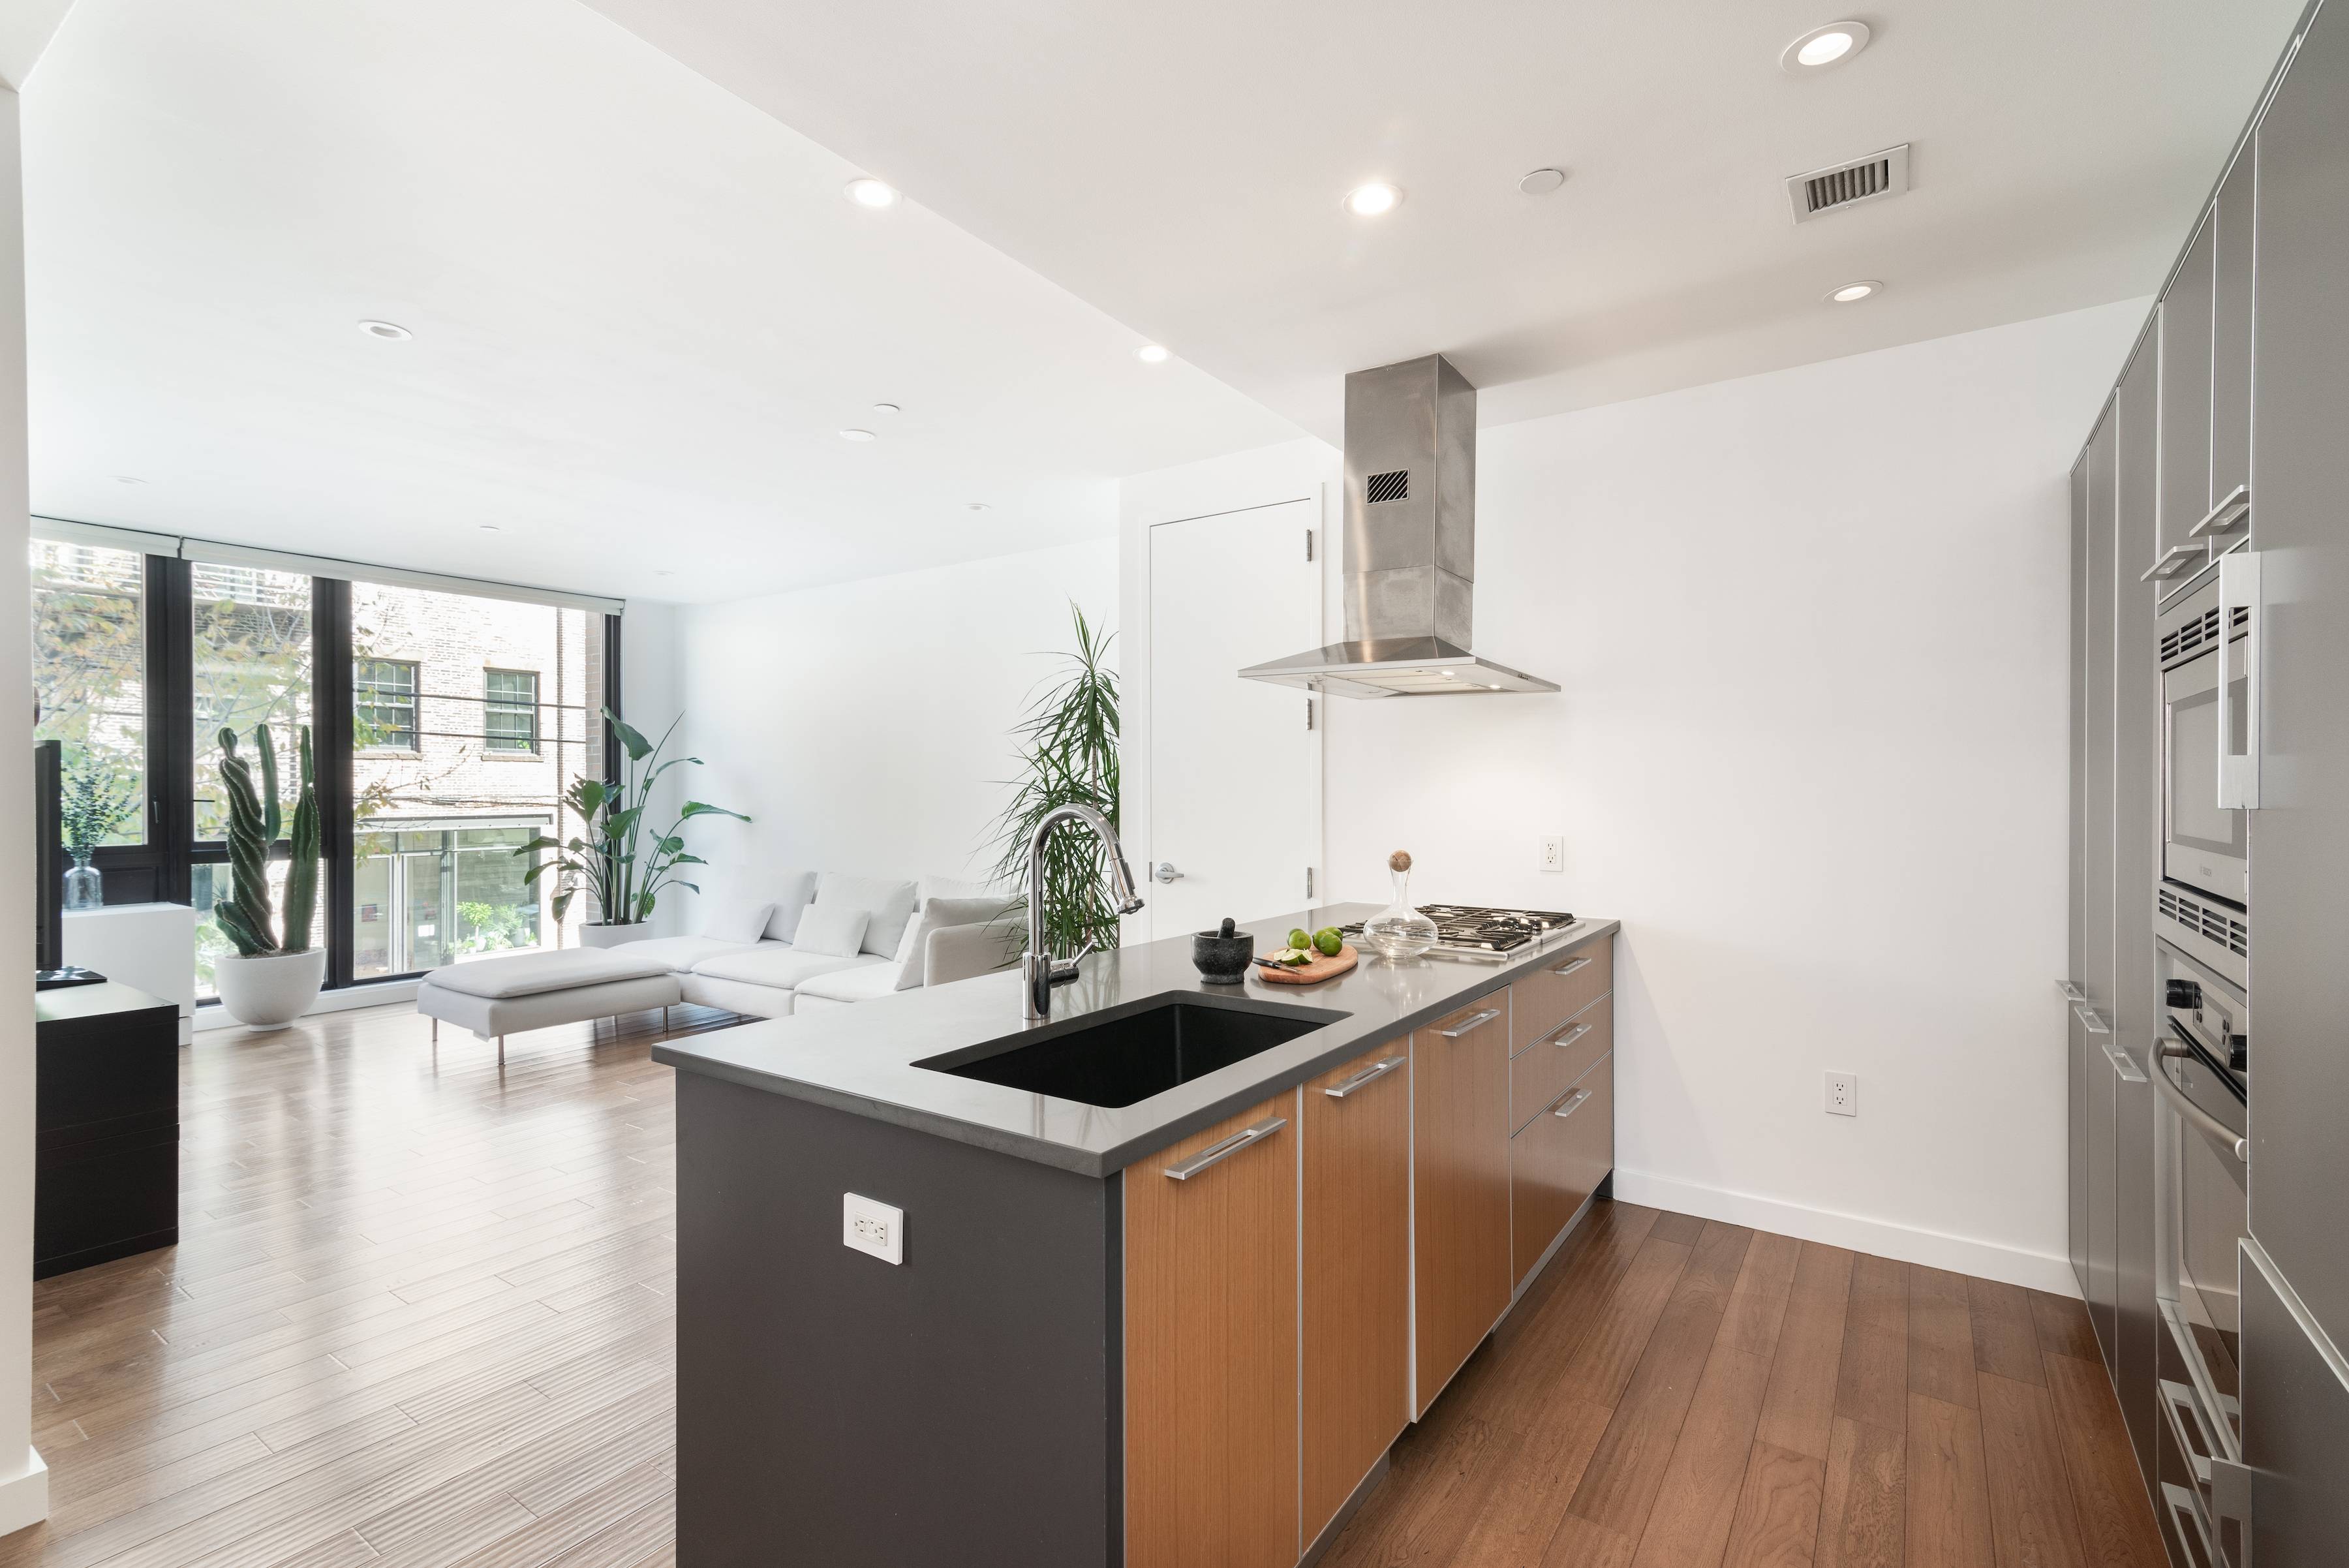 A bright condo boasting chic finishes and a prime Williamsburg location, this 1 bedroom, 1 bathroom home is an exemplar of modern Brooklyn living.